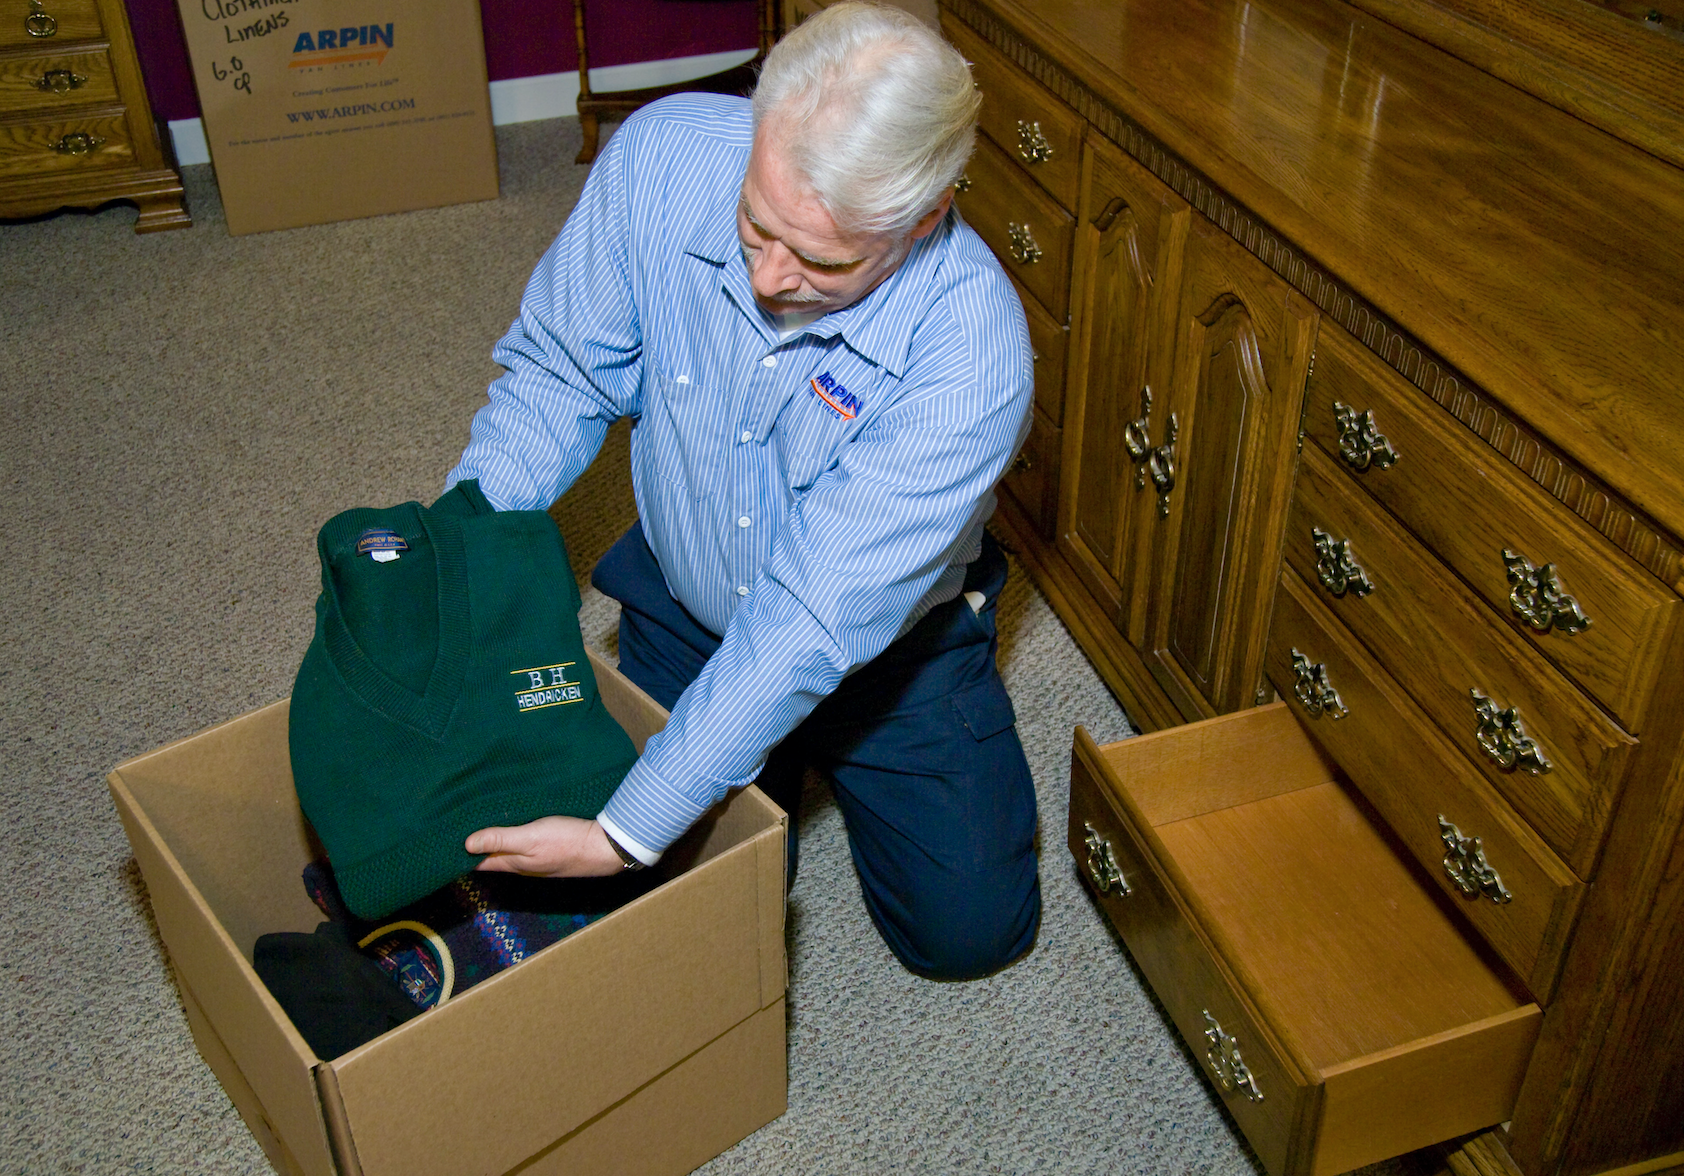 Arpin of RI packer in a bed room removing folded sweaters from a drawer and packing them in a carton.